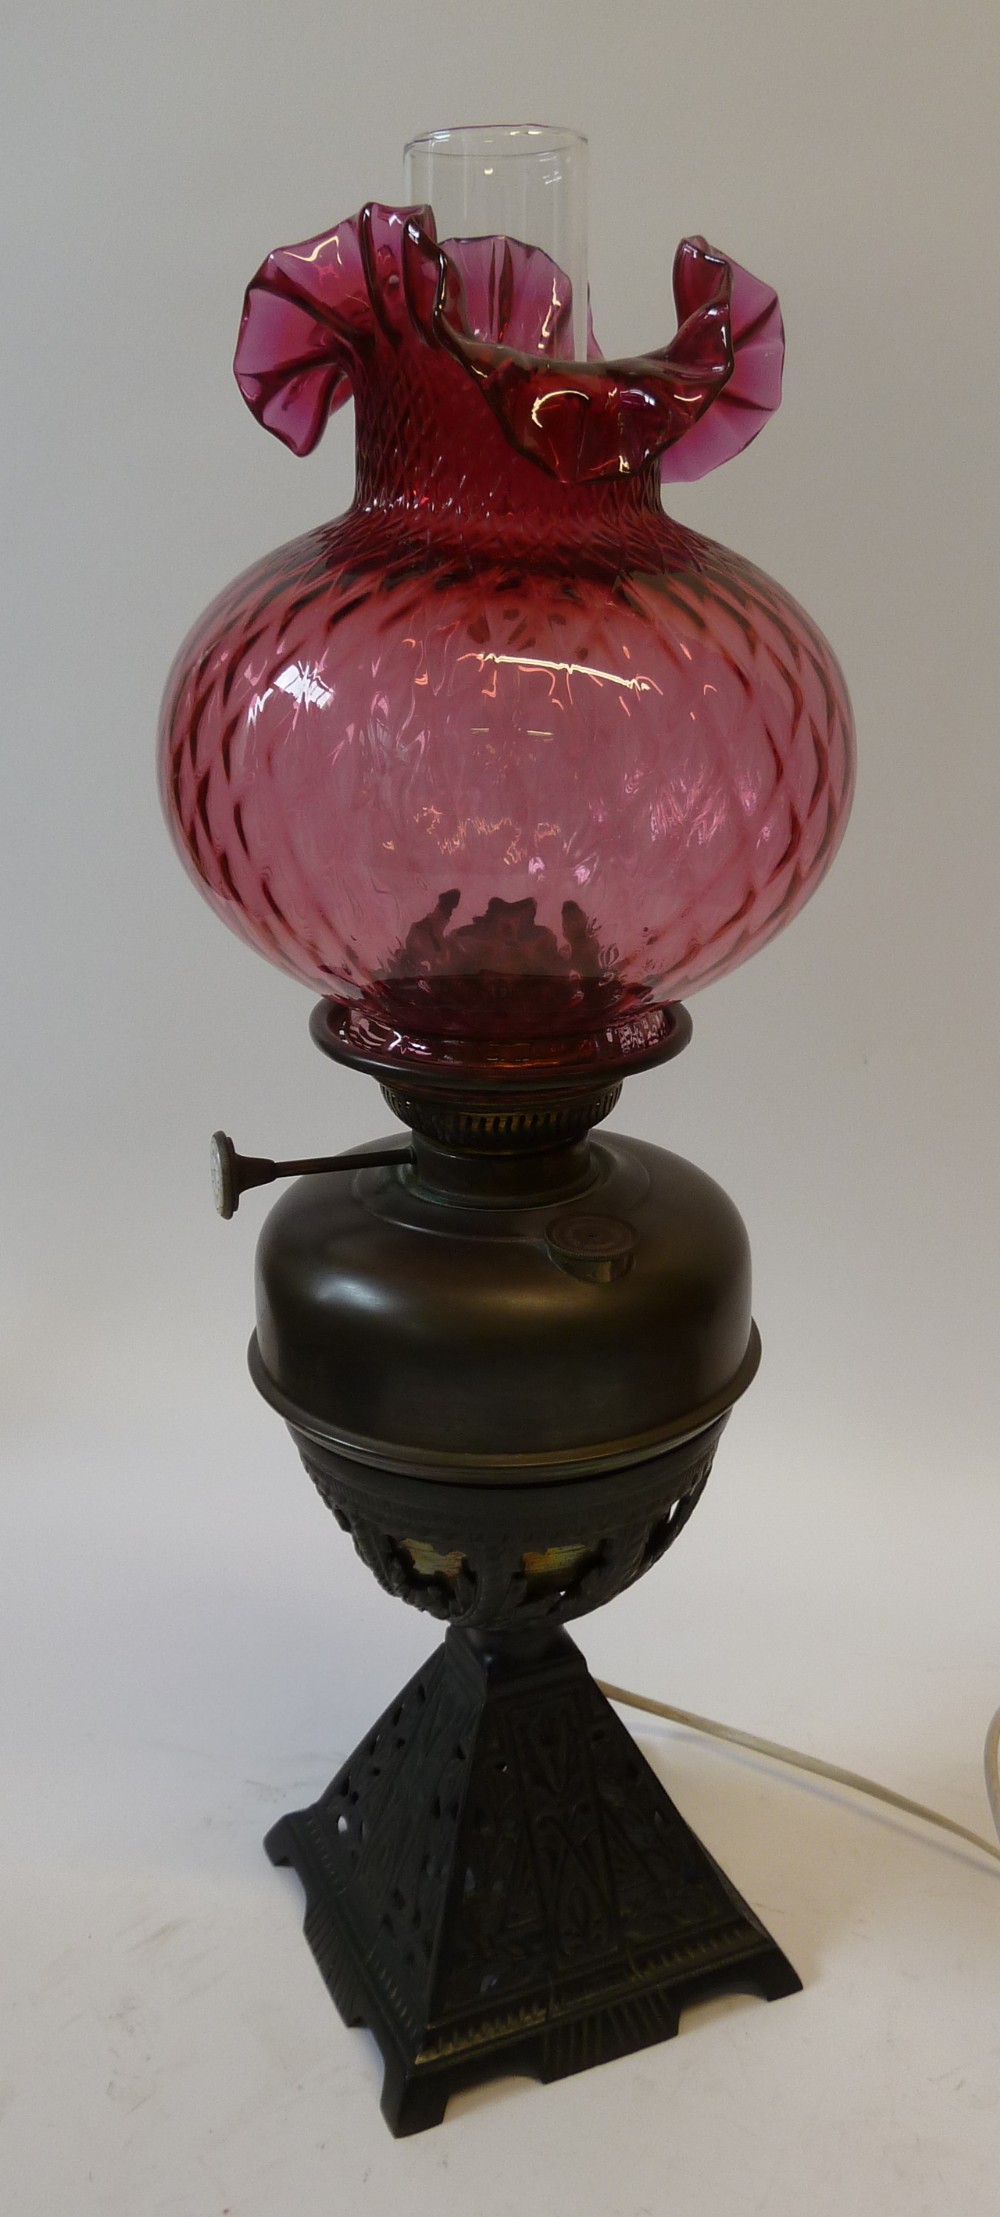 A VICTORIAN CAST IRON TABLE OIL LAMP, LAMPE NATIONAL, with pierced pyramidal base and reservoir